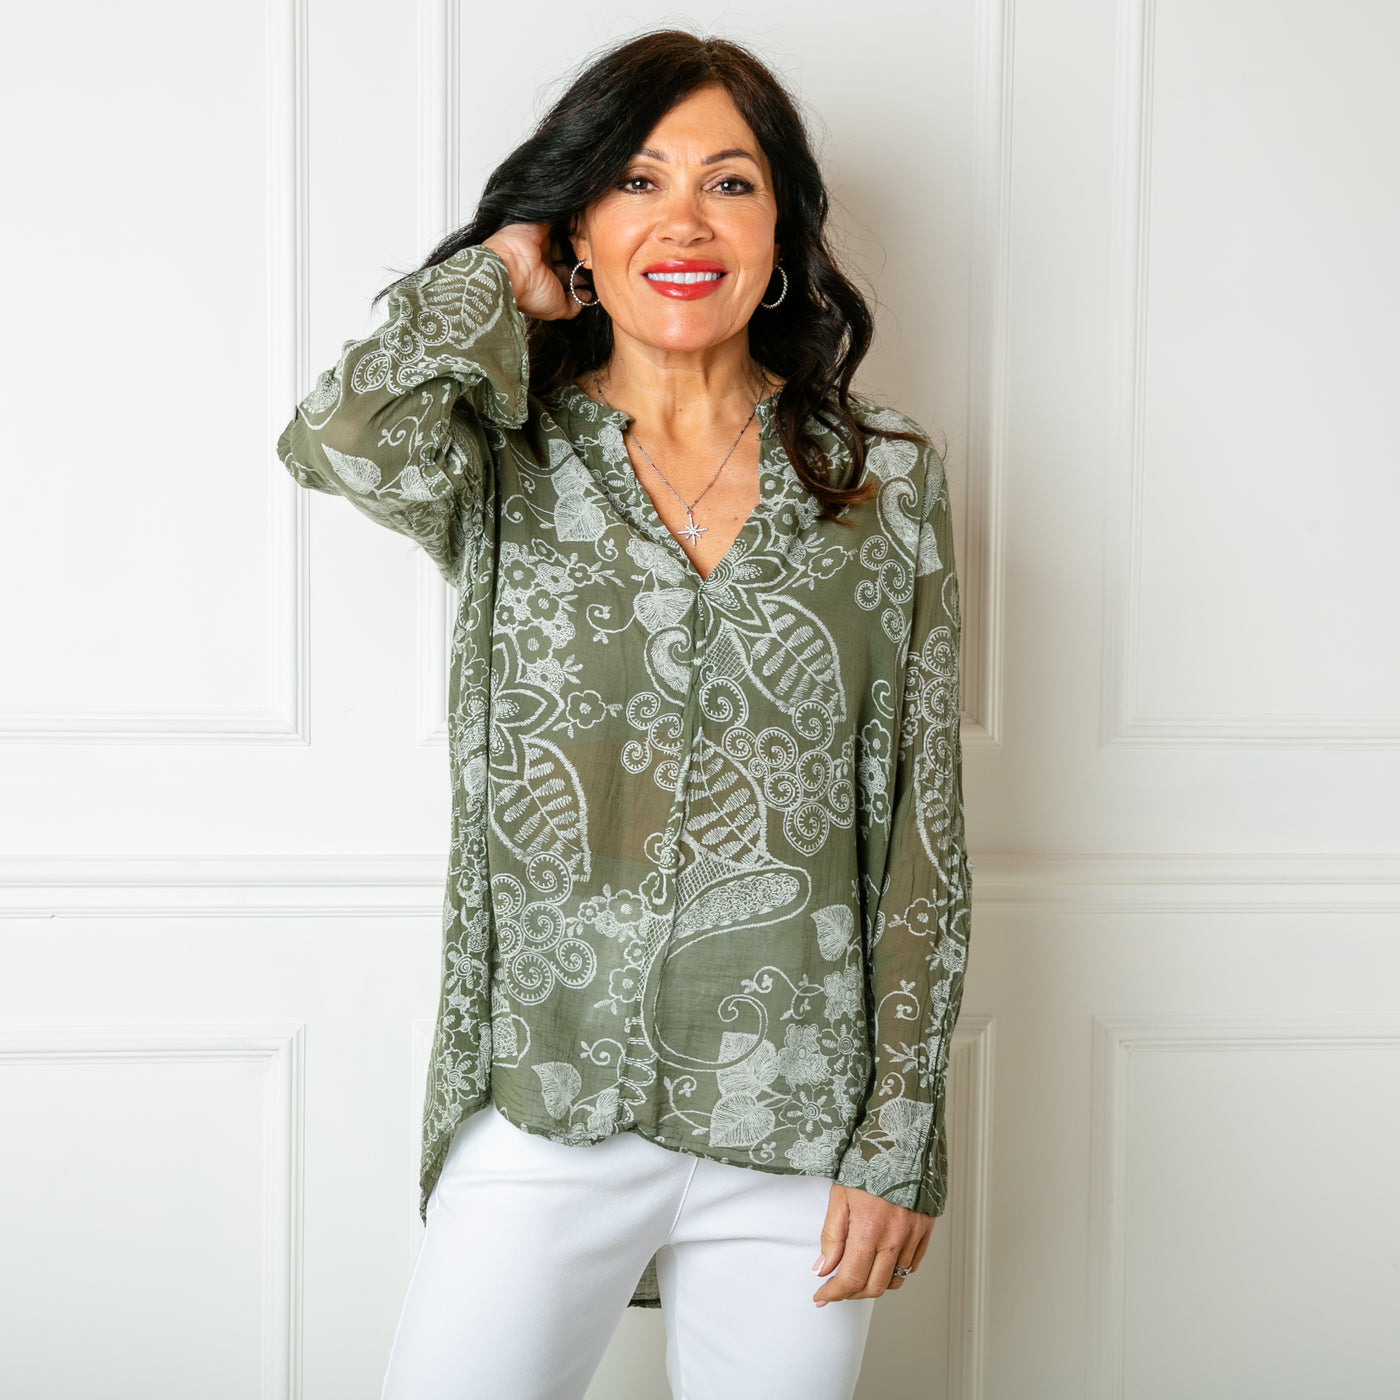 The khaki green Botanical Cotton Blouse in a beautiful floral paisley print with white accents